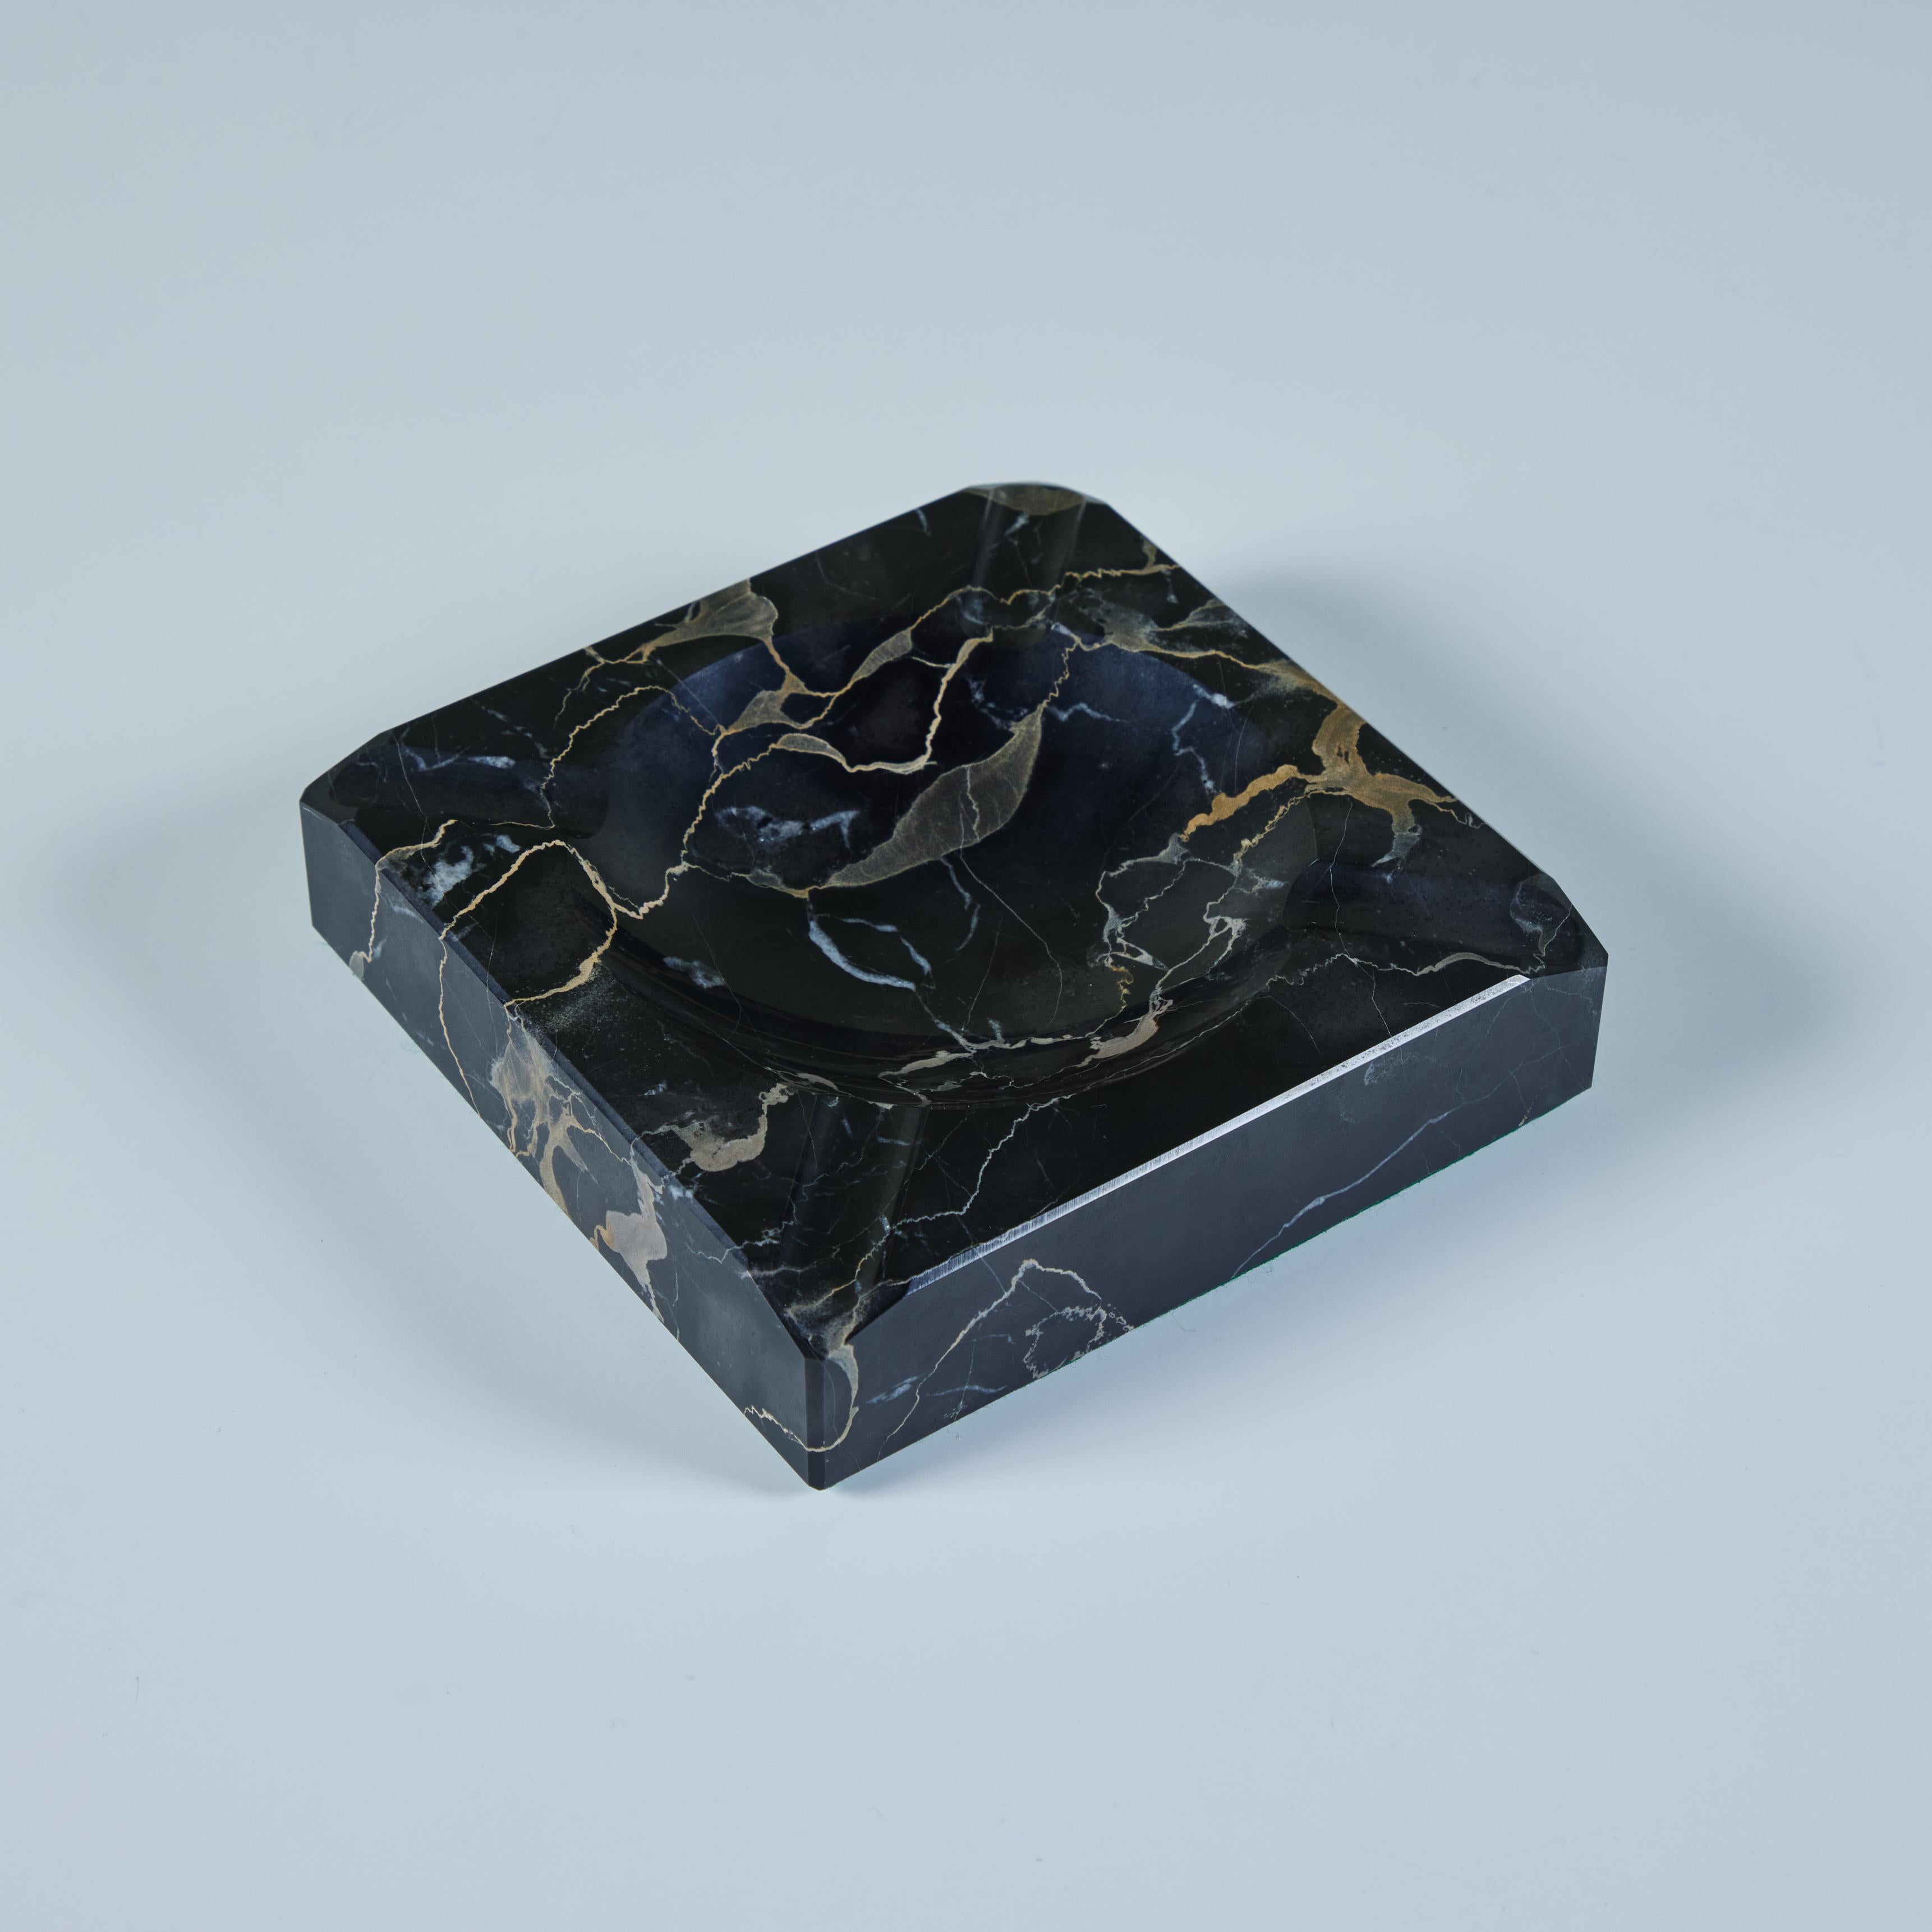 Square marble ashtray in a polished black marble with gray and tan veining. The piece has a circular well, and four routed indentations at each corner.

Dimensions 
6